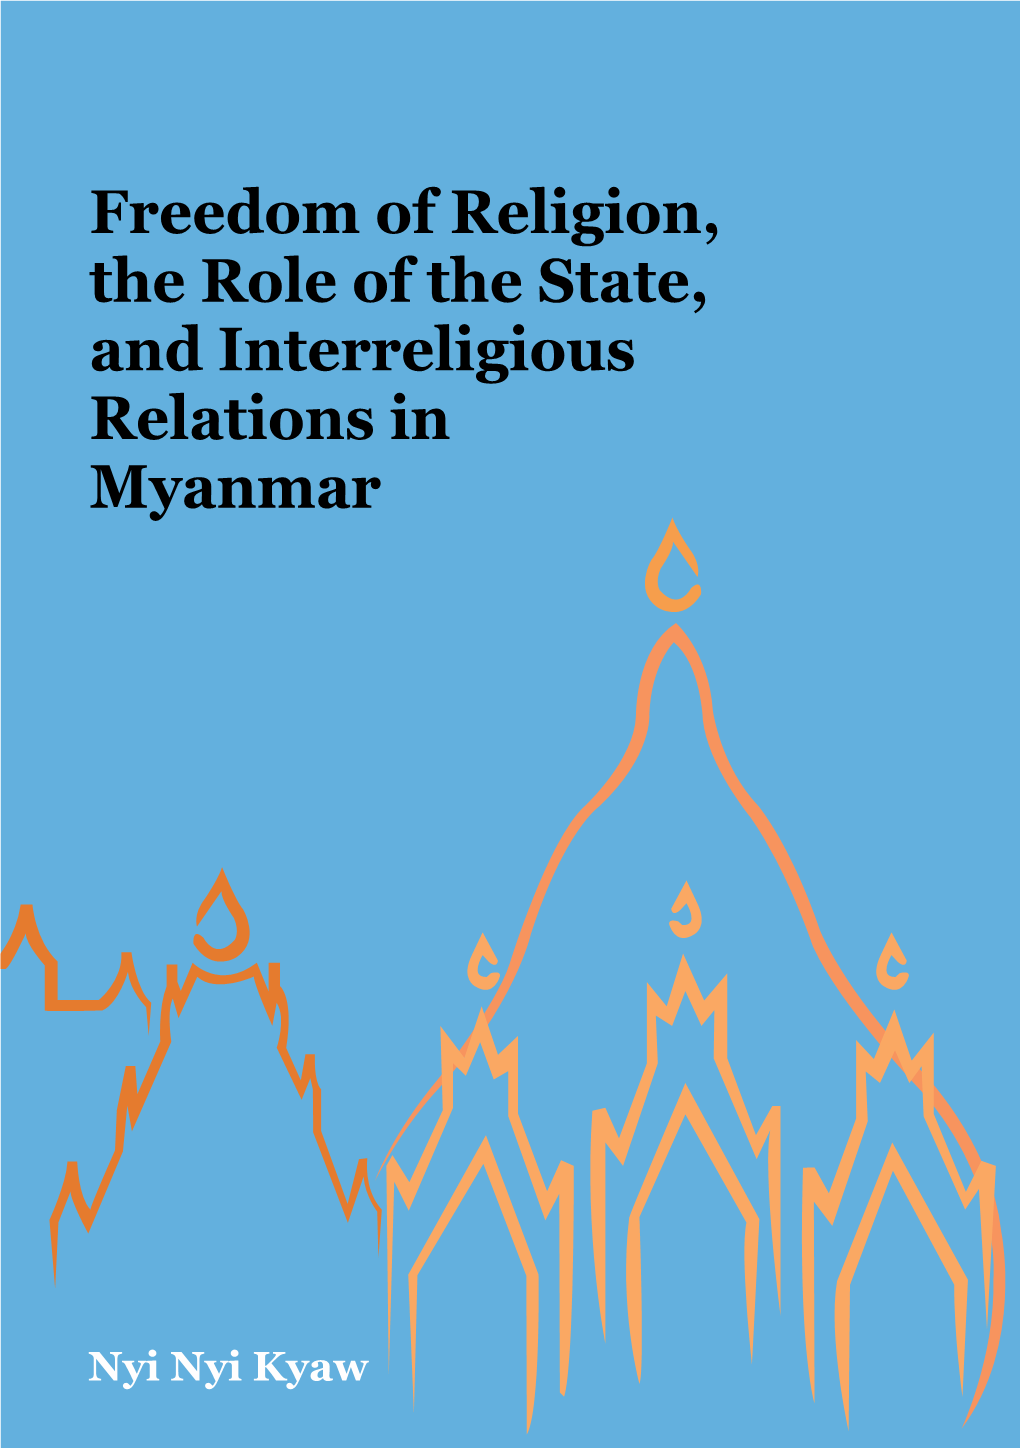 Freedom of Religion, the Role of the State, and Interreligious Relations